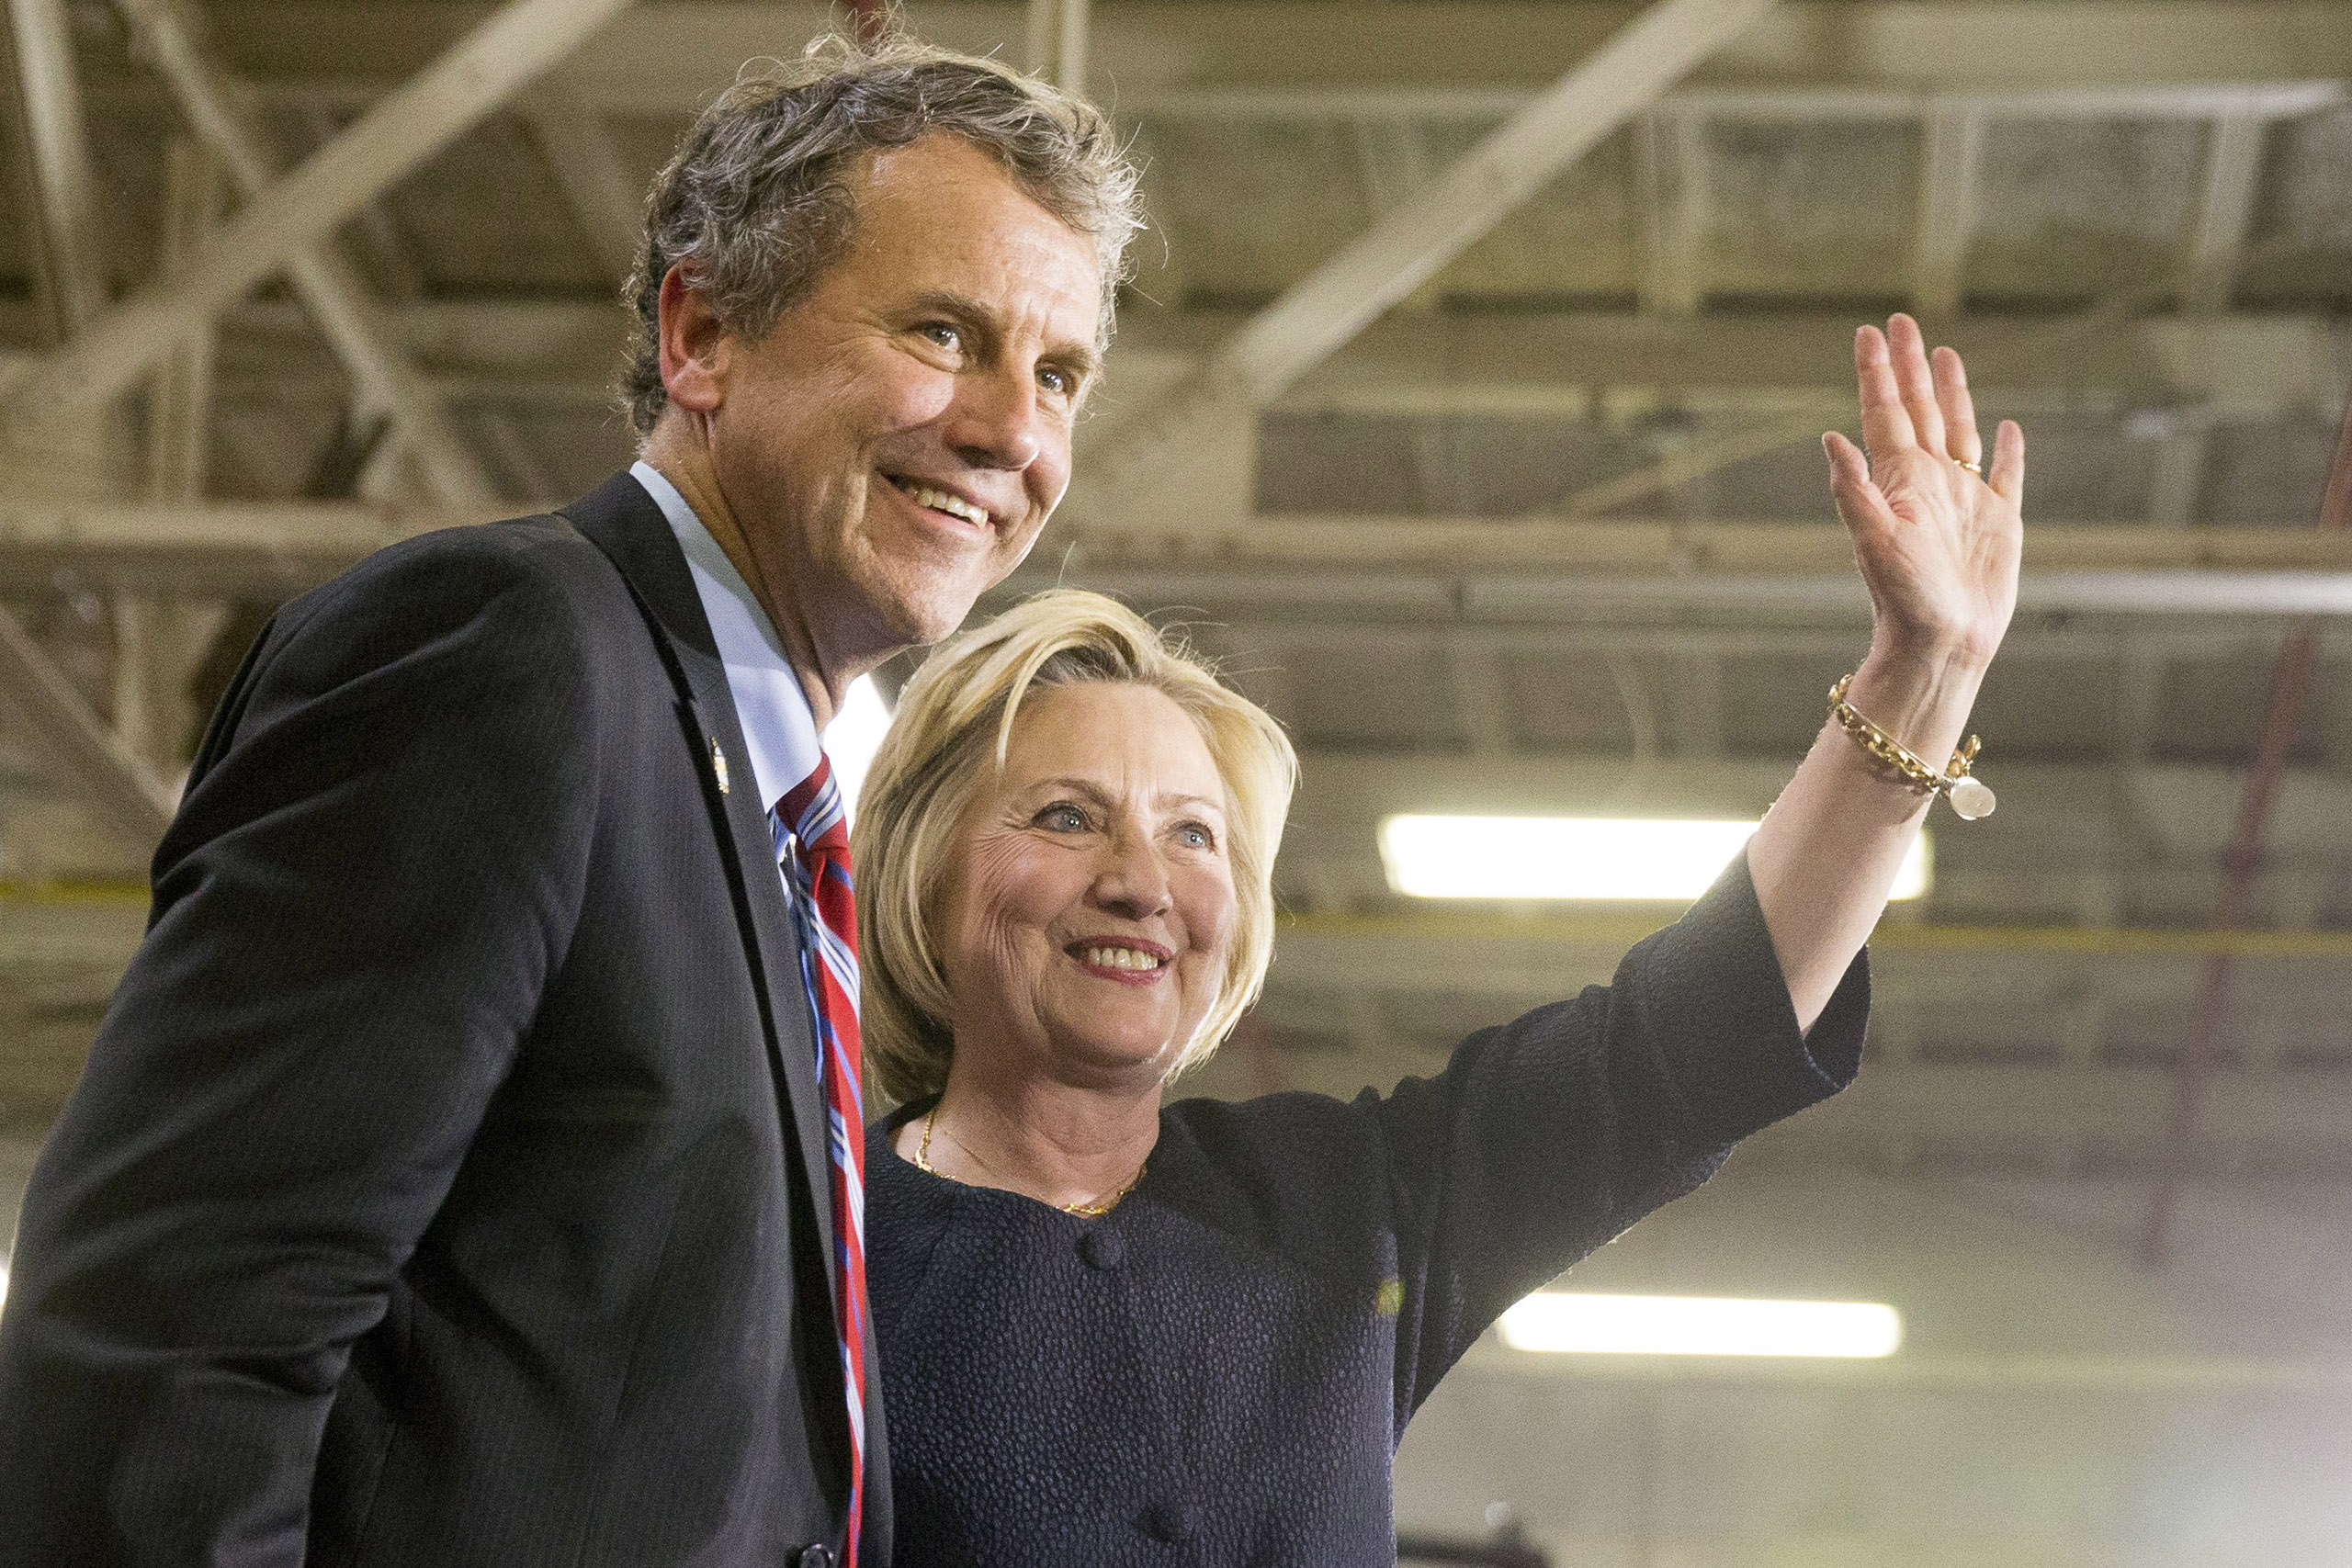 Democratic presidential candidate Hillary Clinton waves to supporters as she stands on stage with Sen. Sherrod Brown after speaking at a rally at a warehouse in Cleveland on June 13, 2016. ((Andrew Harnik—AP))